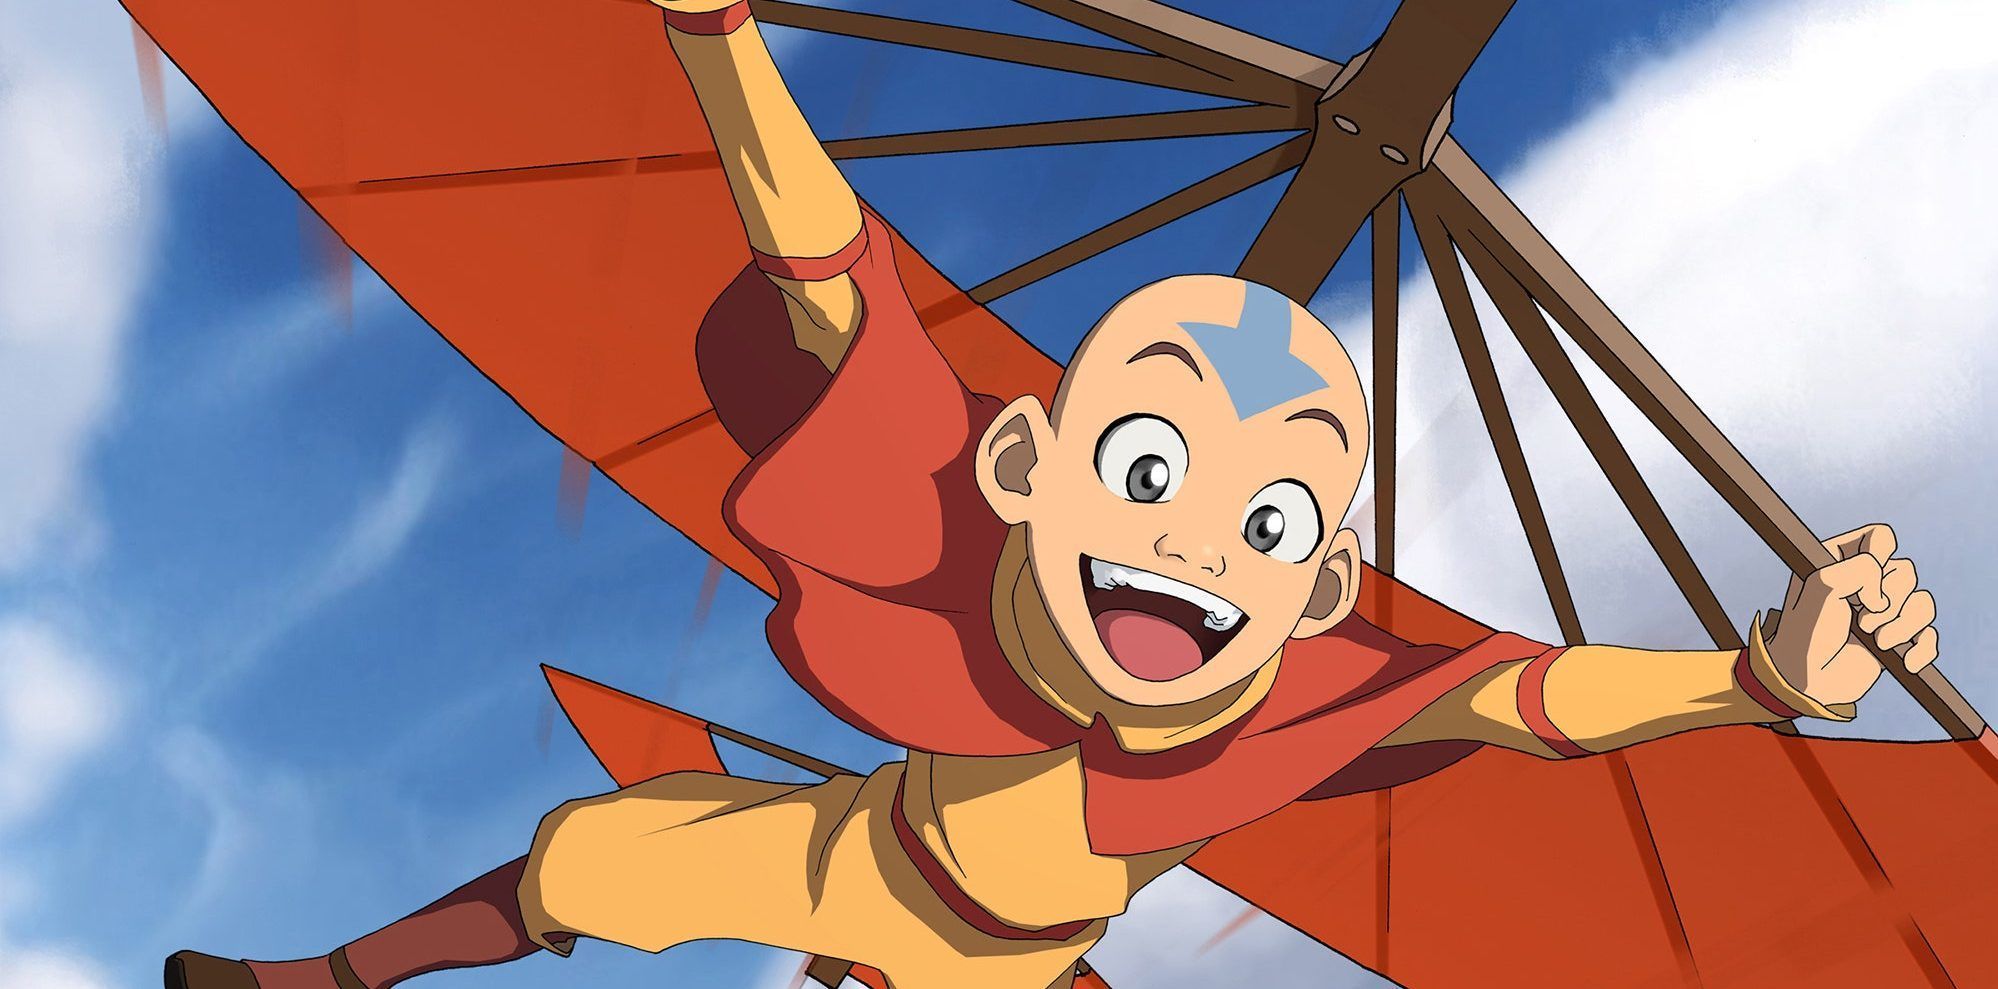 Explained: Avatar: The Last Airbender & the Success Of Western Anime